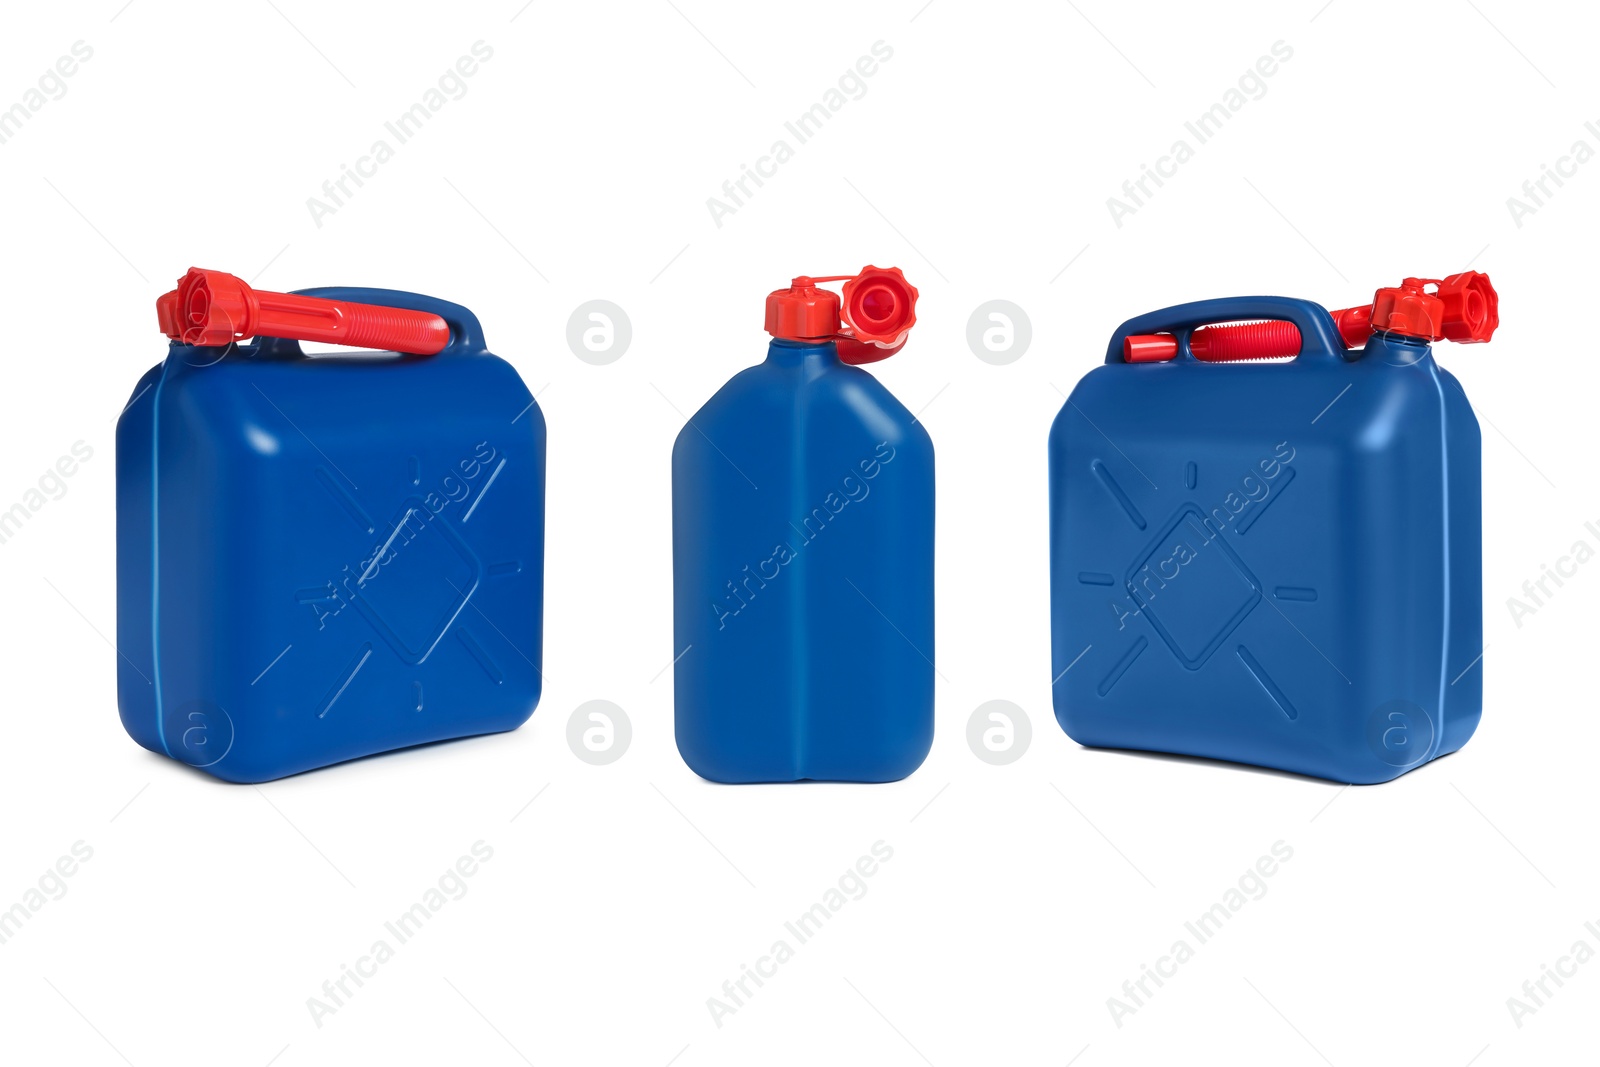 Image of Blue plastic canister on white background, different sides